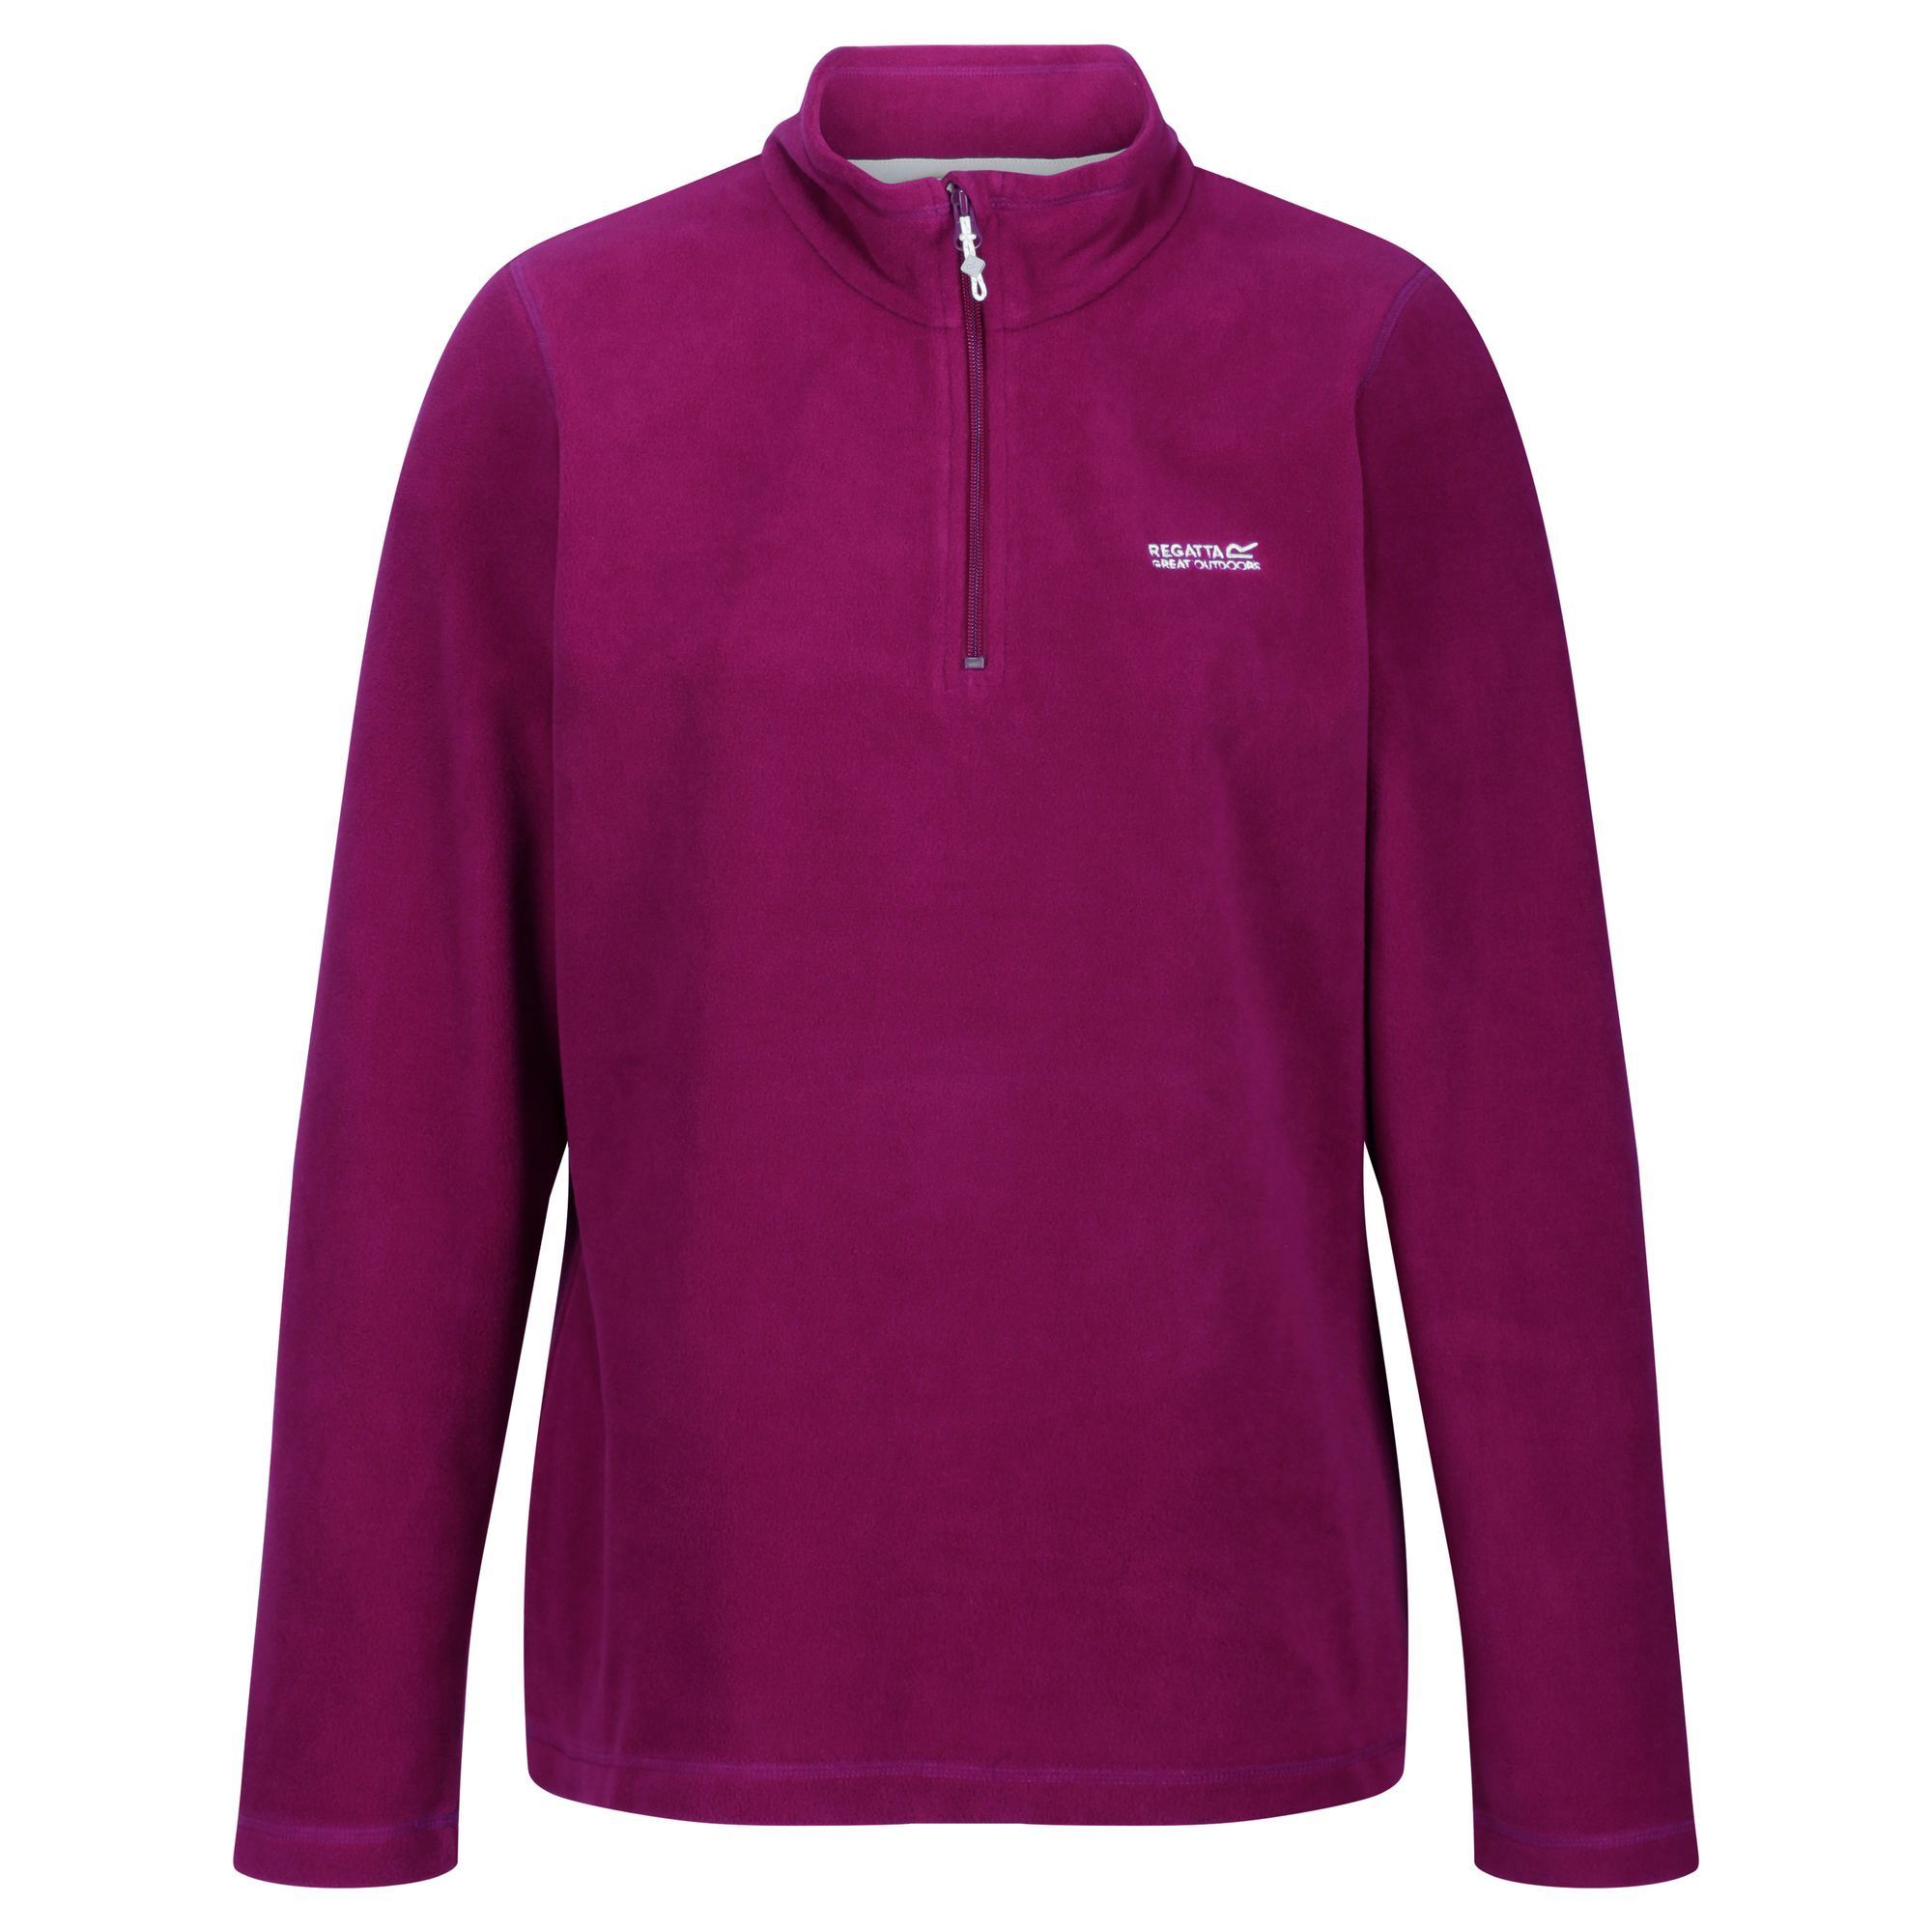 The womens Sweetheart Fleece is a best seller across the seasons. The classic 1/4 zip, loved for its great quality and value, is cut with a relaxed, everyday fit from lighter weight Symmetry fleece with an anti-pill finish. 100% Polyester. Regatta Womens sizing (bust approx): 6 (30in/76cm), 8 (32in/81cm), 10 (34in/86cm), 12 (36in/92cm), 14 (38in/97cm), 16 (40in/102cm), 18 (43in/109cm), 20 (45in/114cm), 22 (48in/122cm), 24 (50in/127cm), 26 (52in/132cm), 28 (54in/137cm), 30 (56in/142cm), 32 (58in/147cm), 34 (60in/152cm), 36 (62in/158cm).